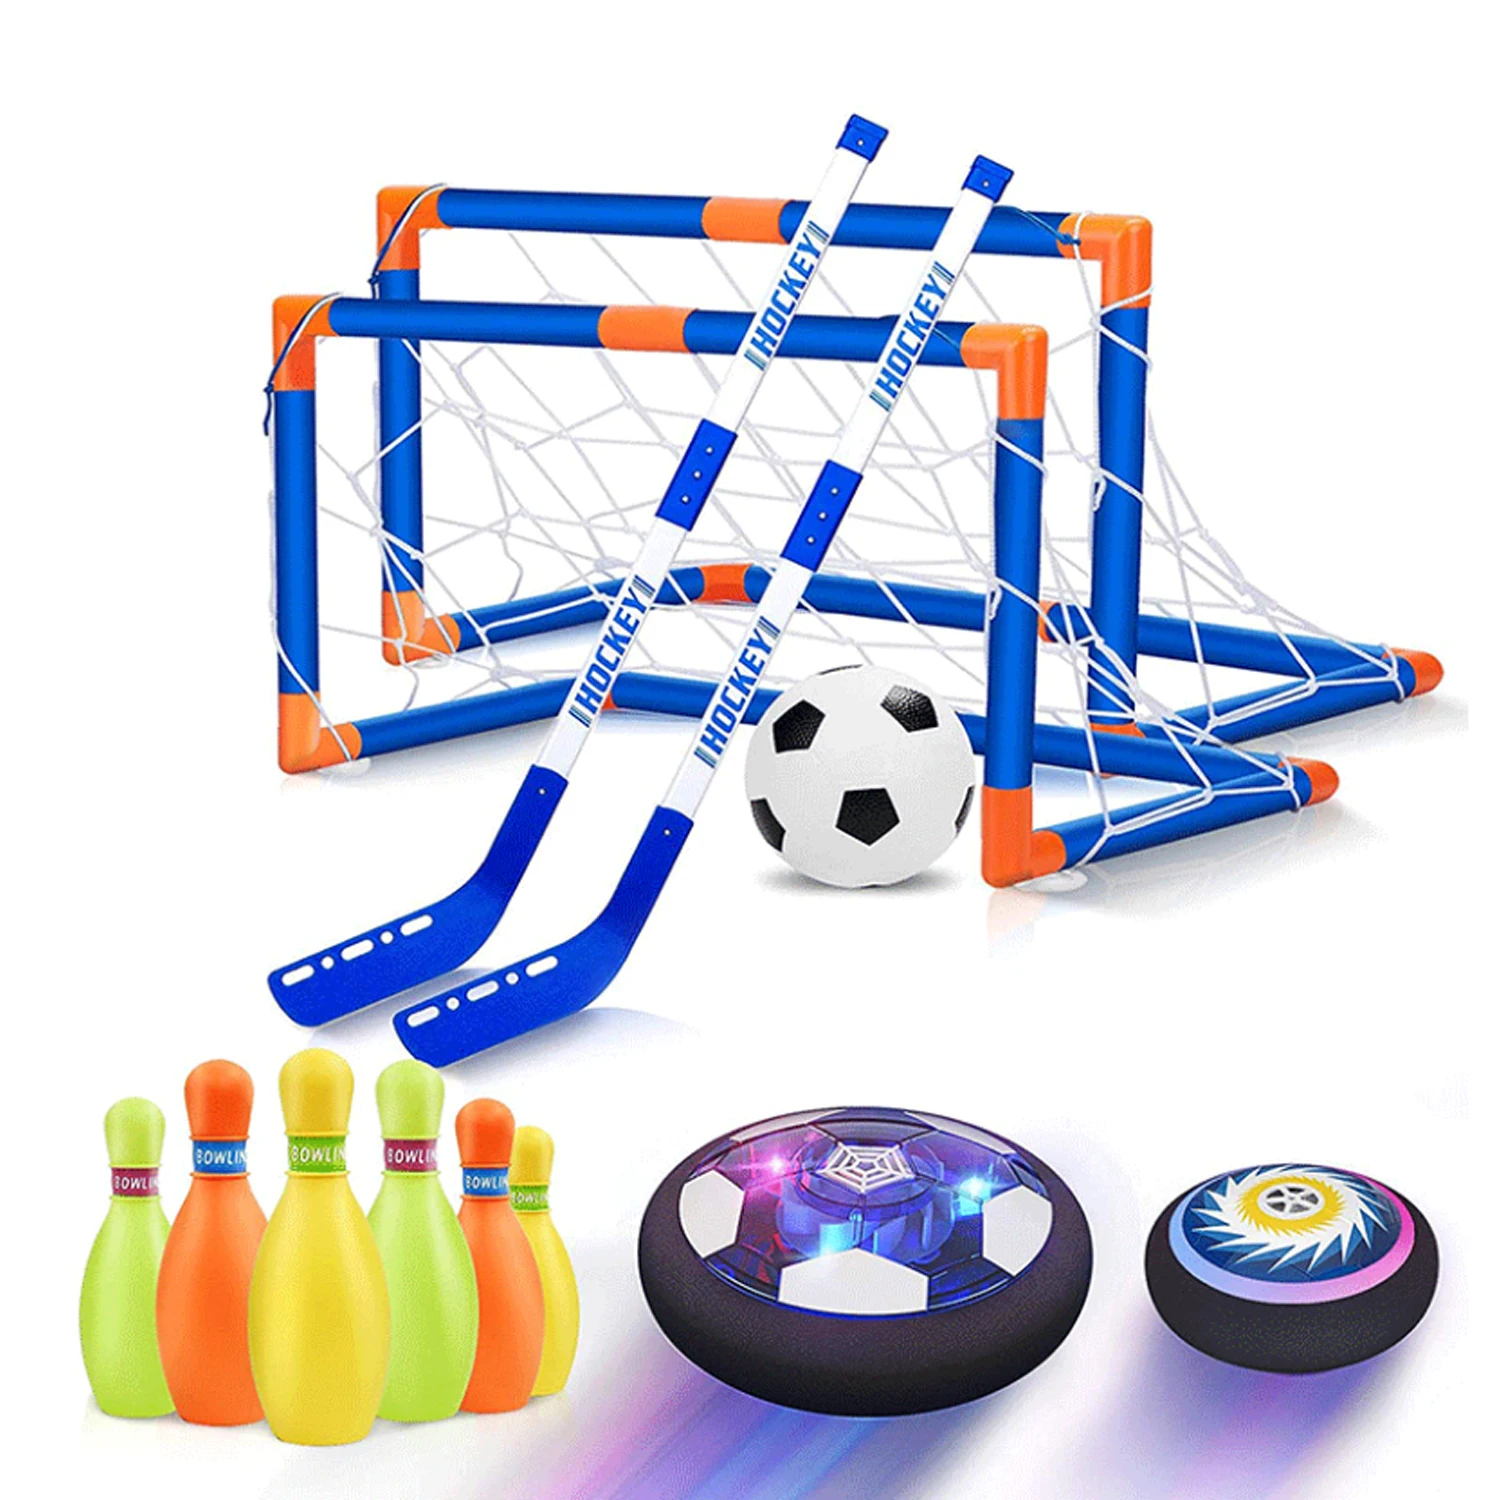 

3-in-1 Hover Hockey Soccer Bowling Set USB Rechargeable Battery Hockey Floating Air Electric Soccer with Led Light Foam Bumper